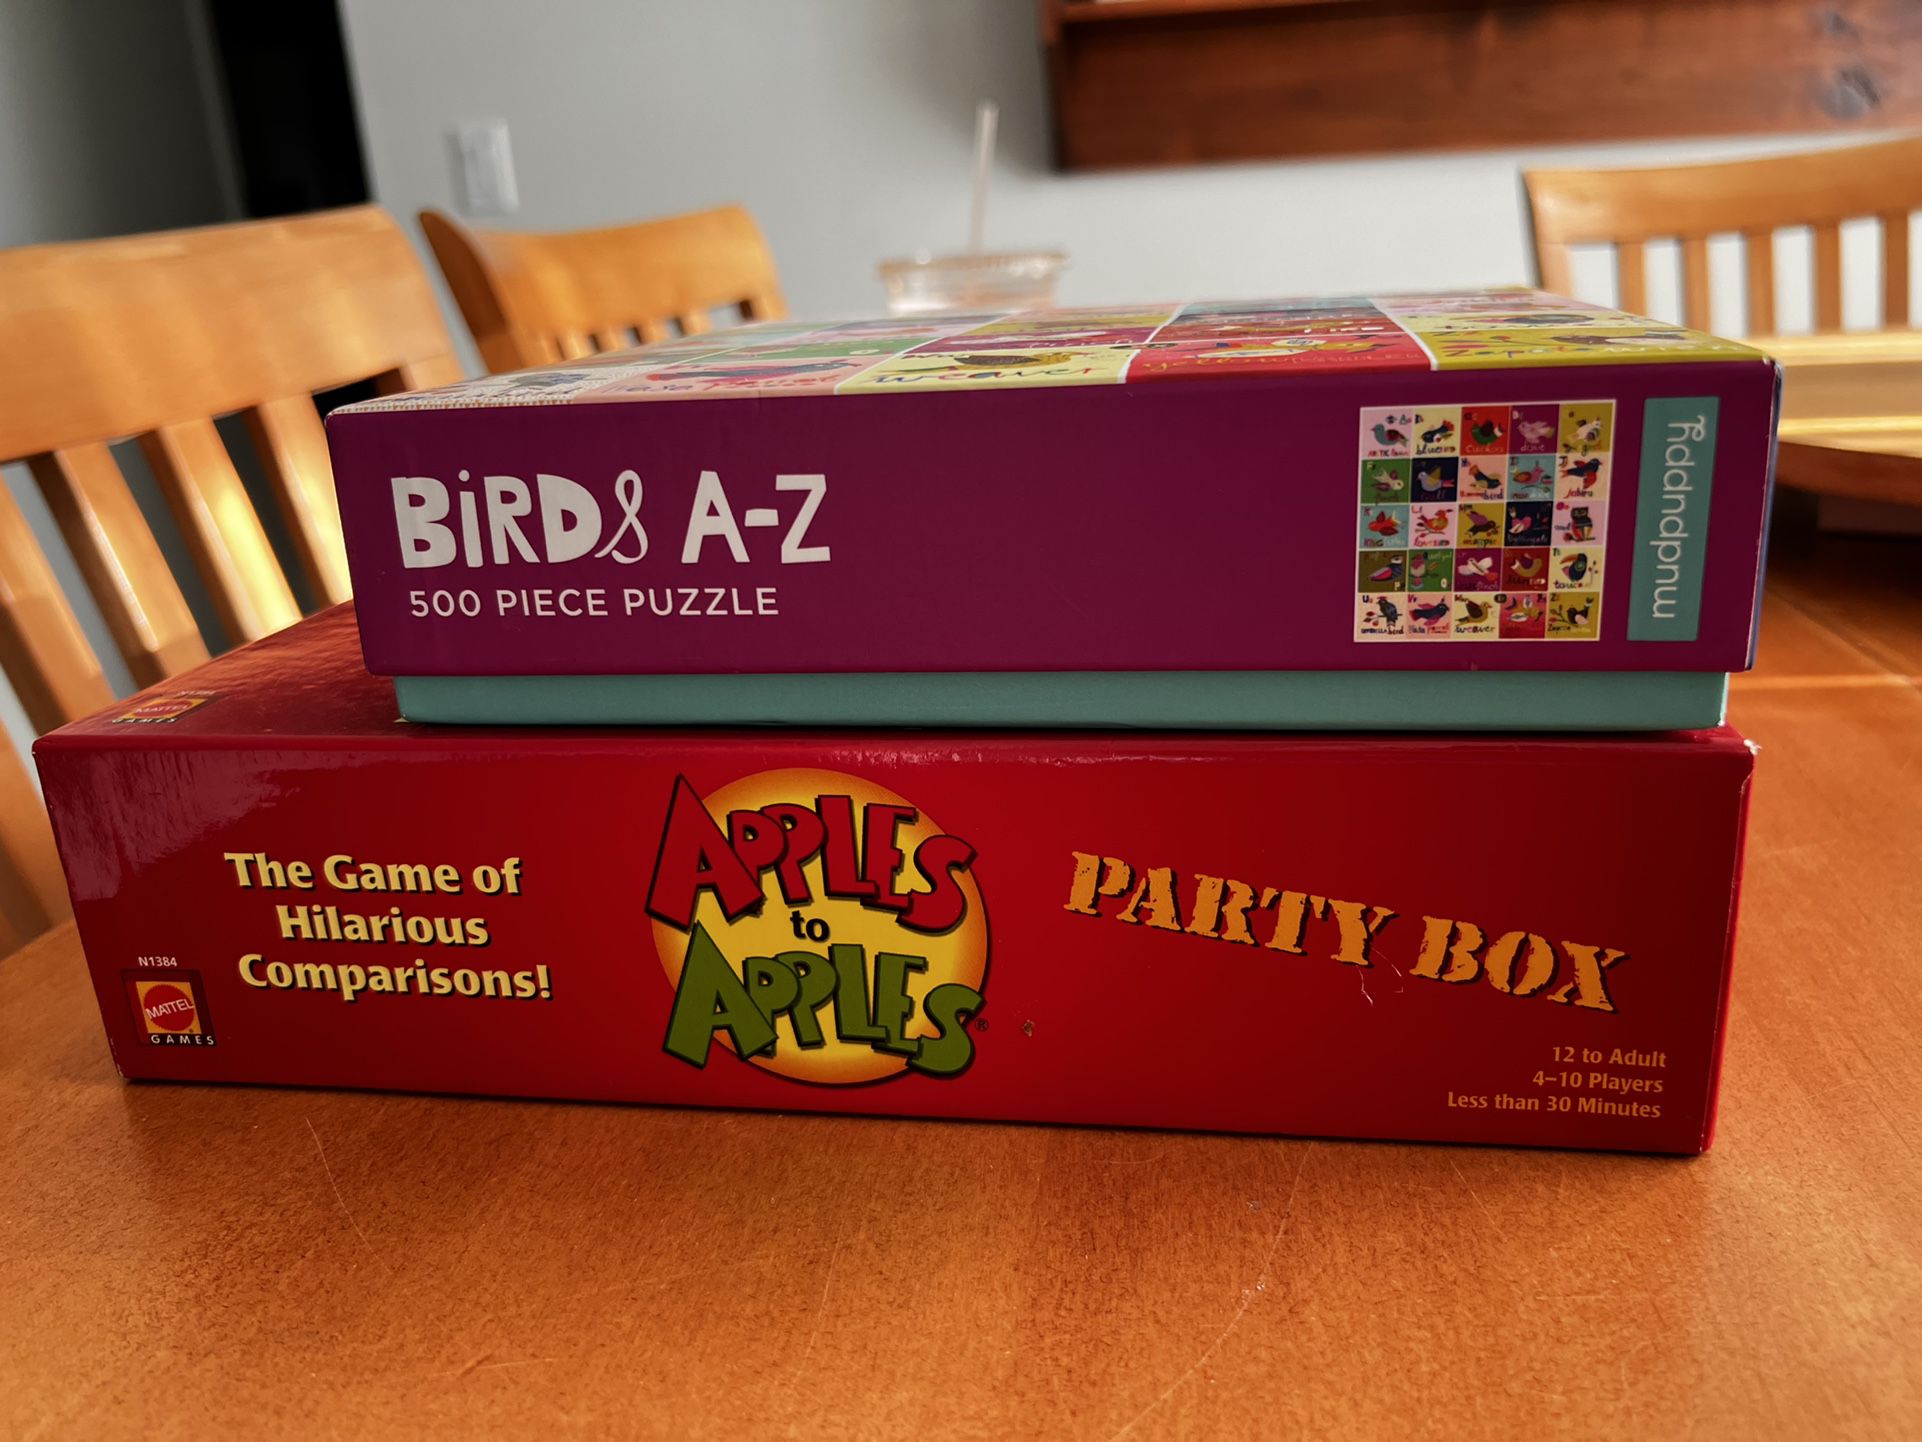 Apple to apples PARTY BOX + 500-piece bird Puzzle Sealed